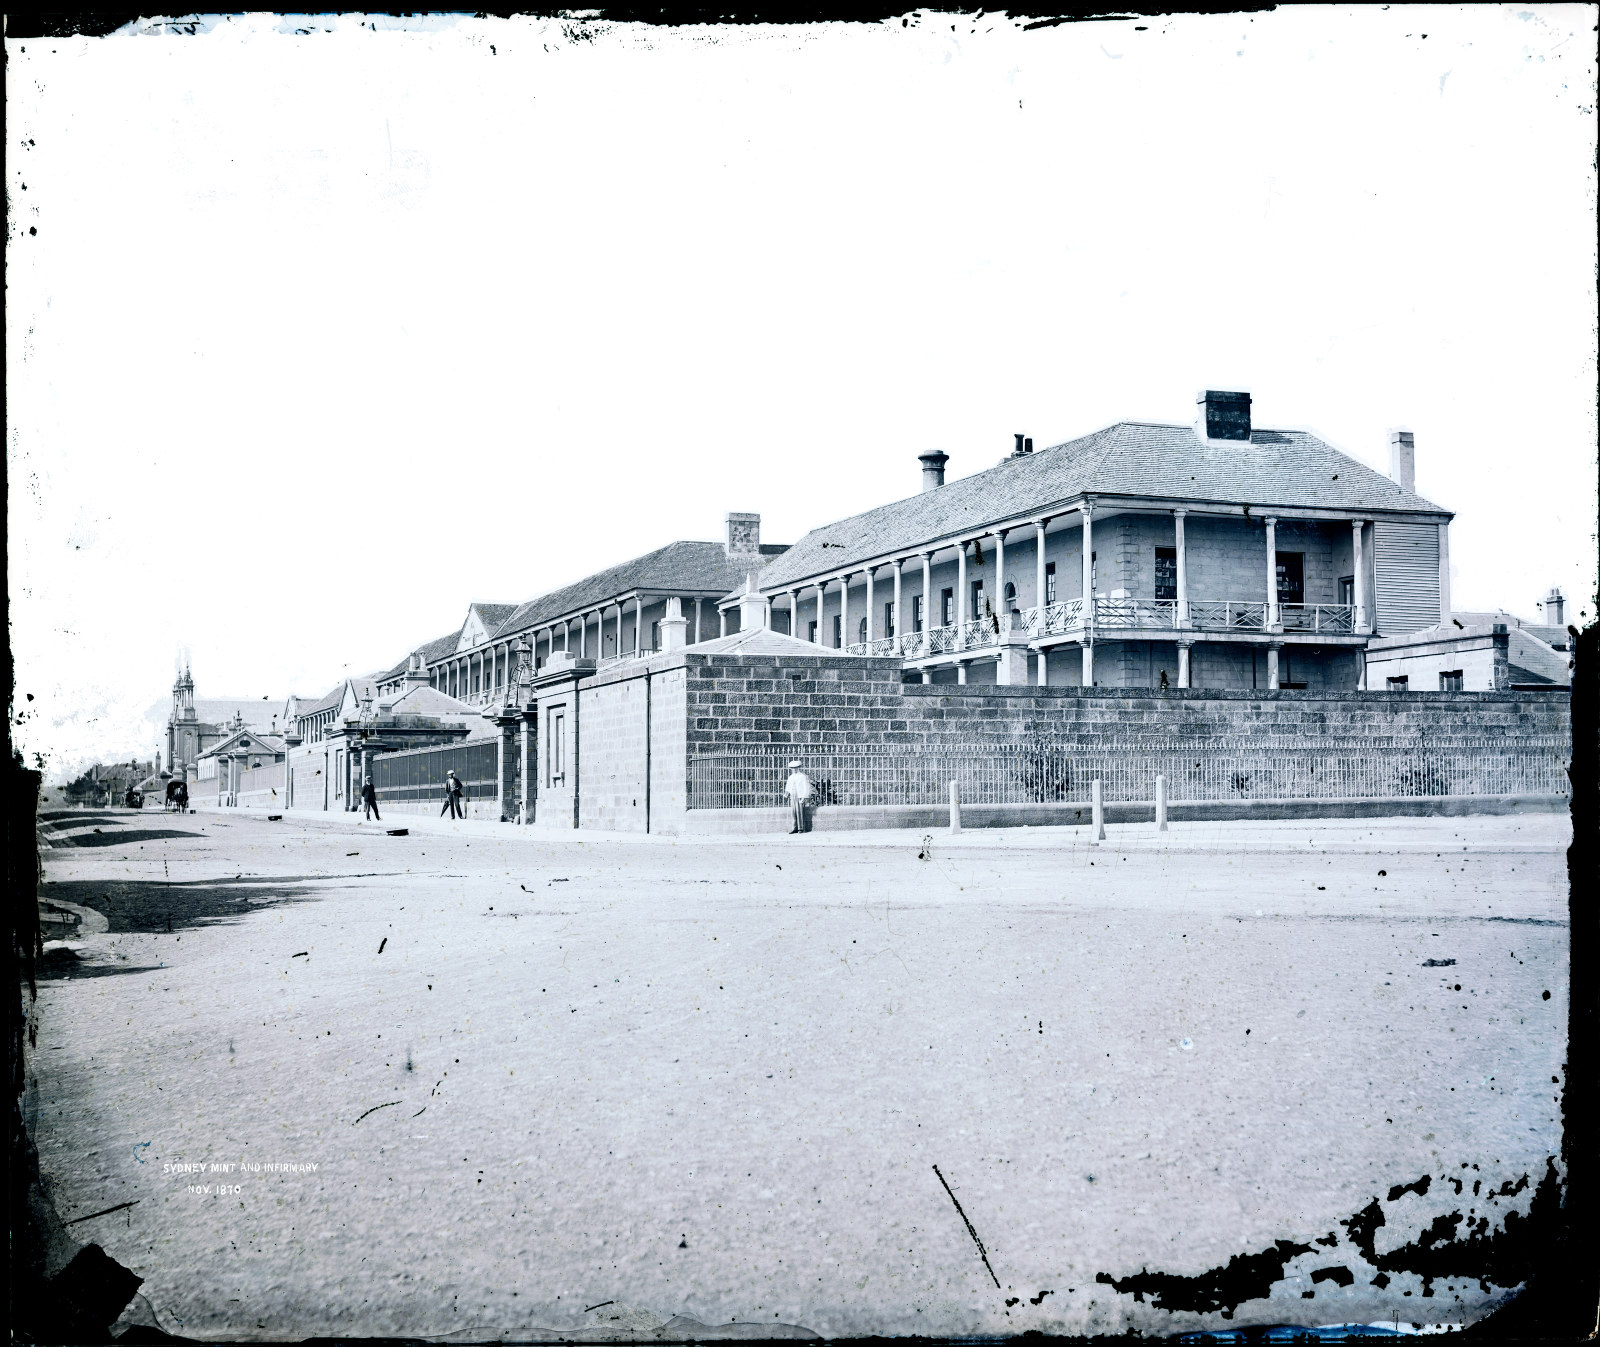 Sydney Mint and Infirmary,  Macquarie Street, Queens Square, November 1870